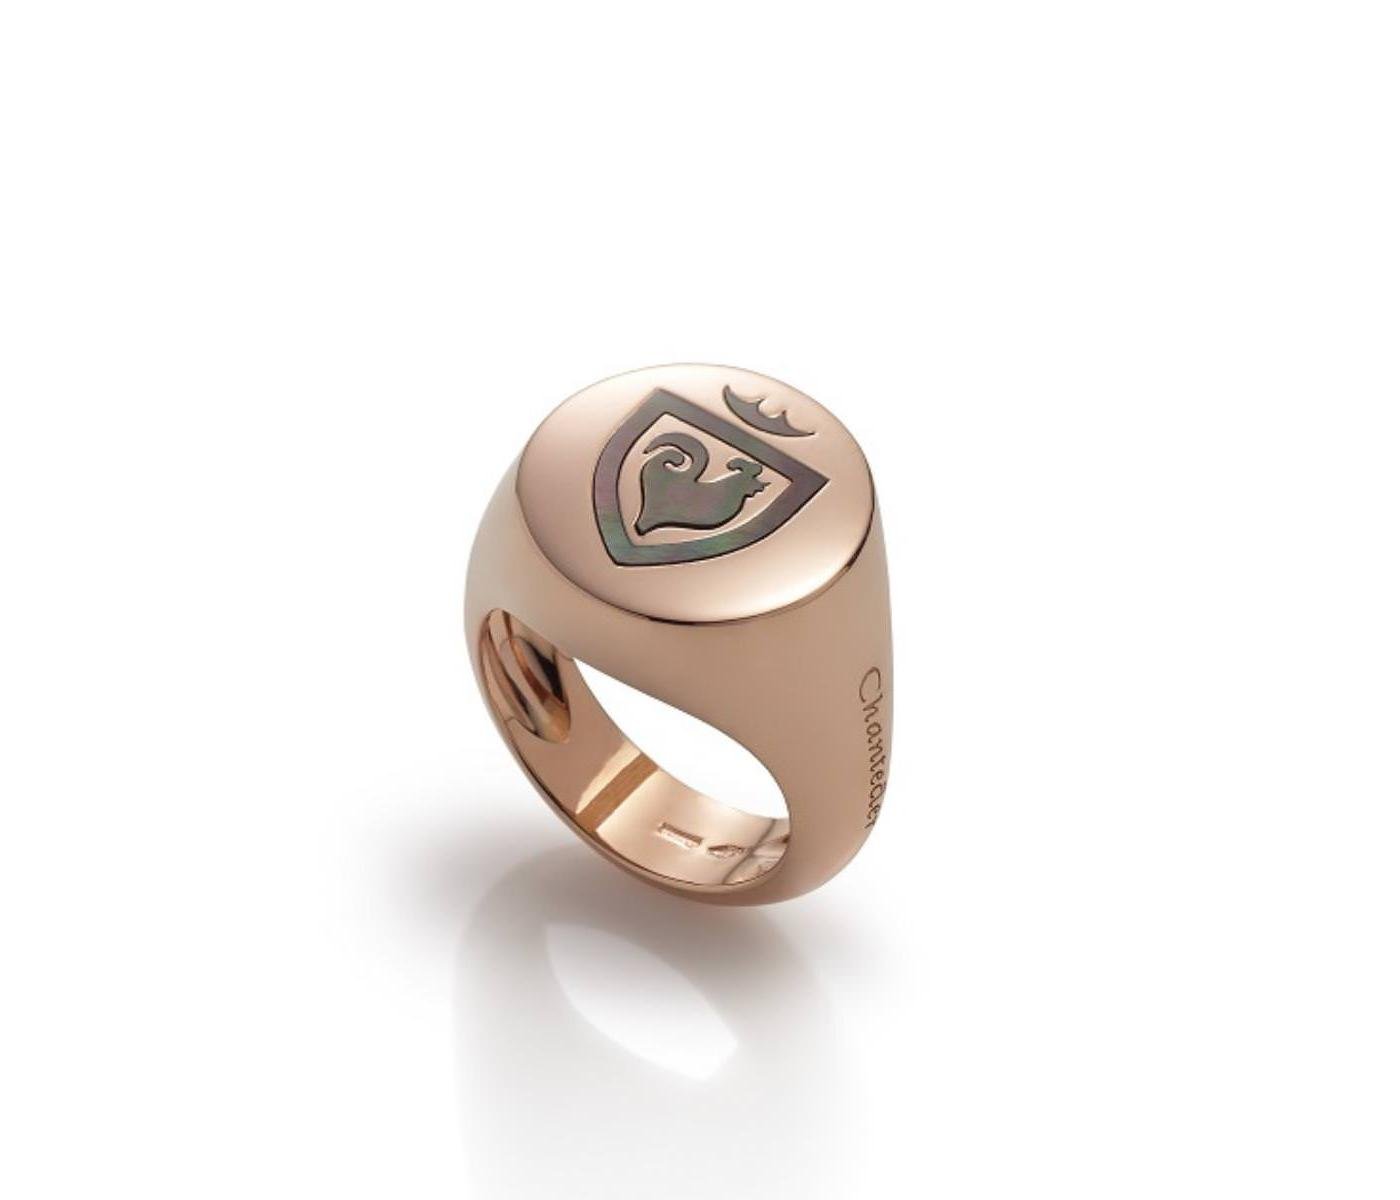 Ring by Chantecler